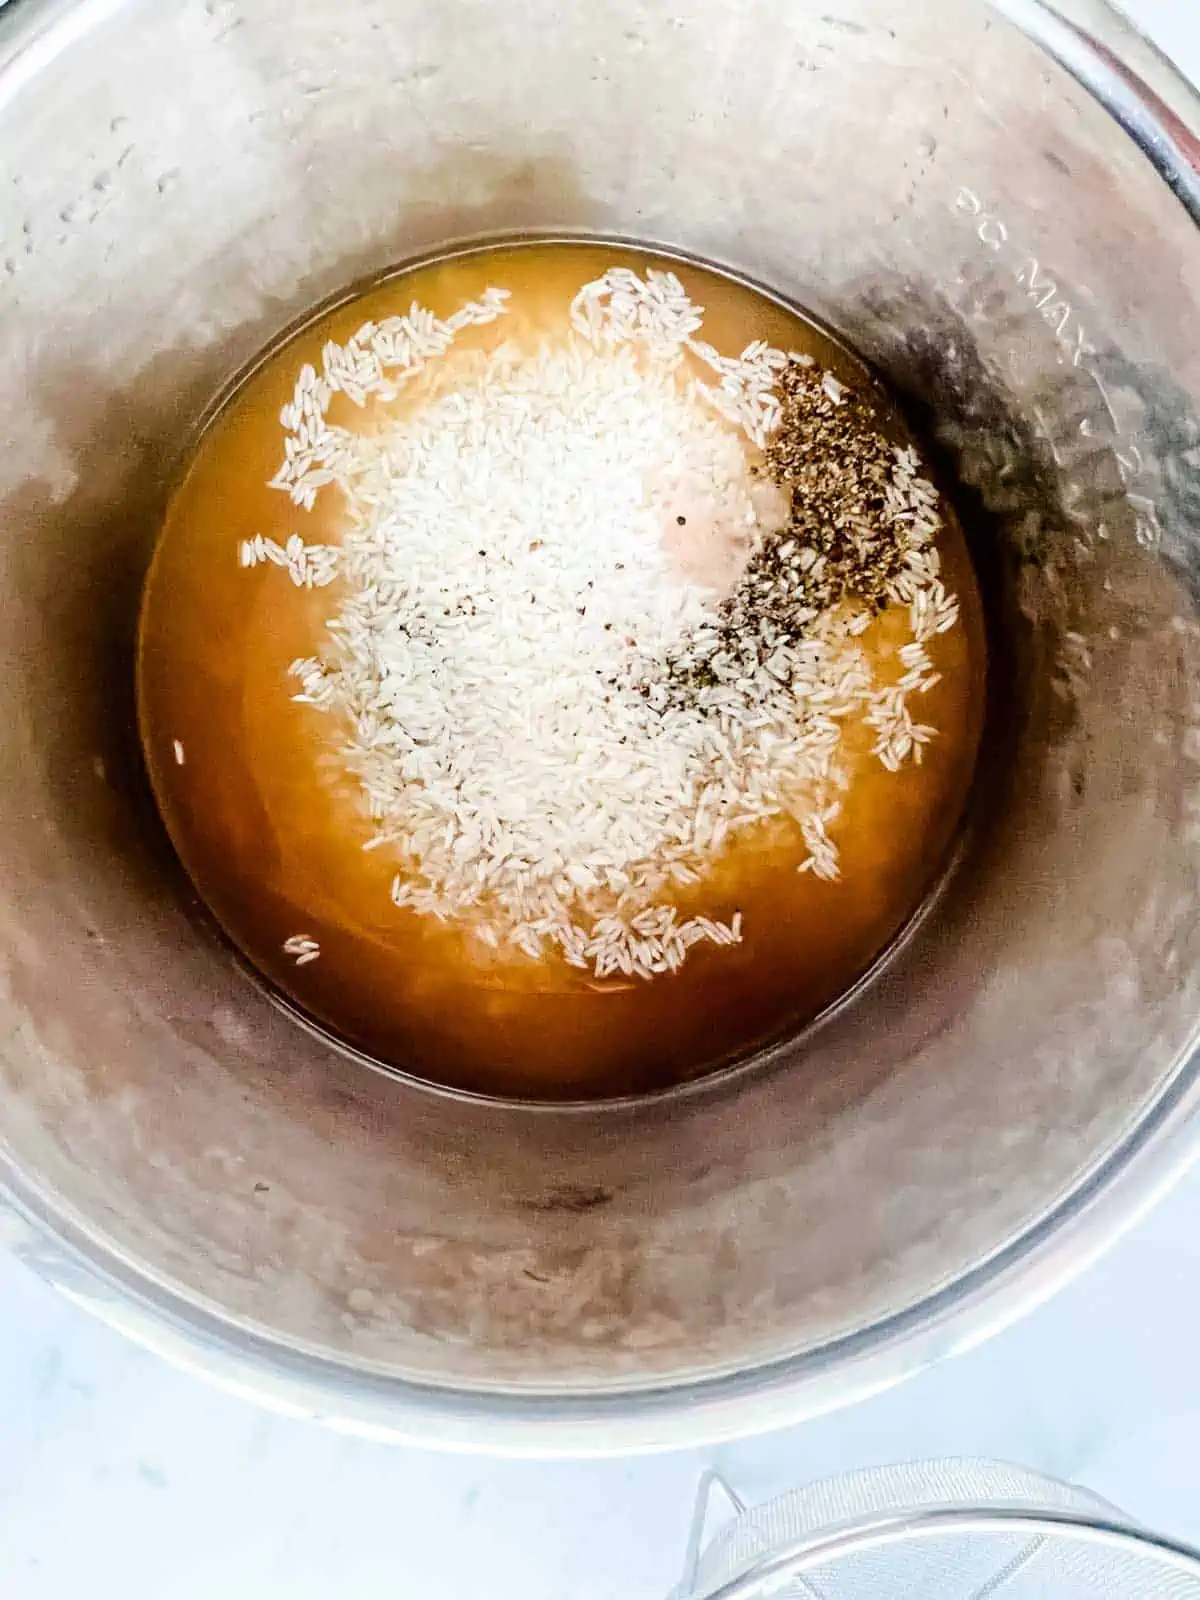 Broth, rice, and seasonings in an Instant Pot.